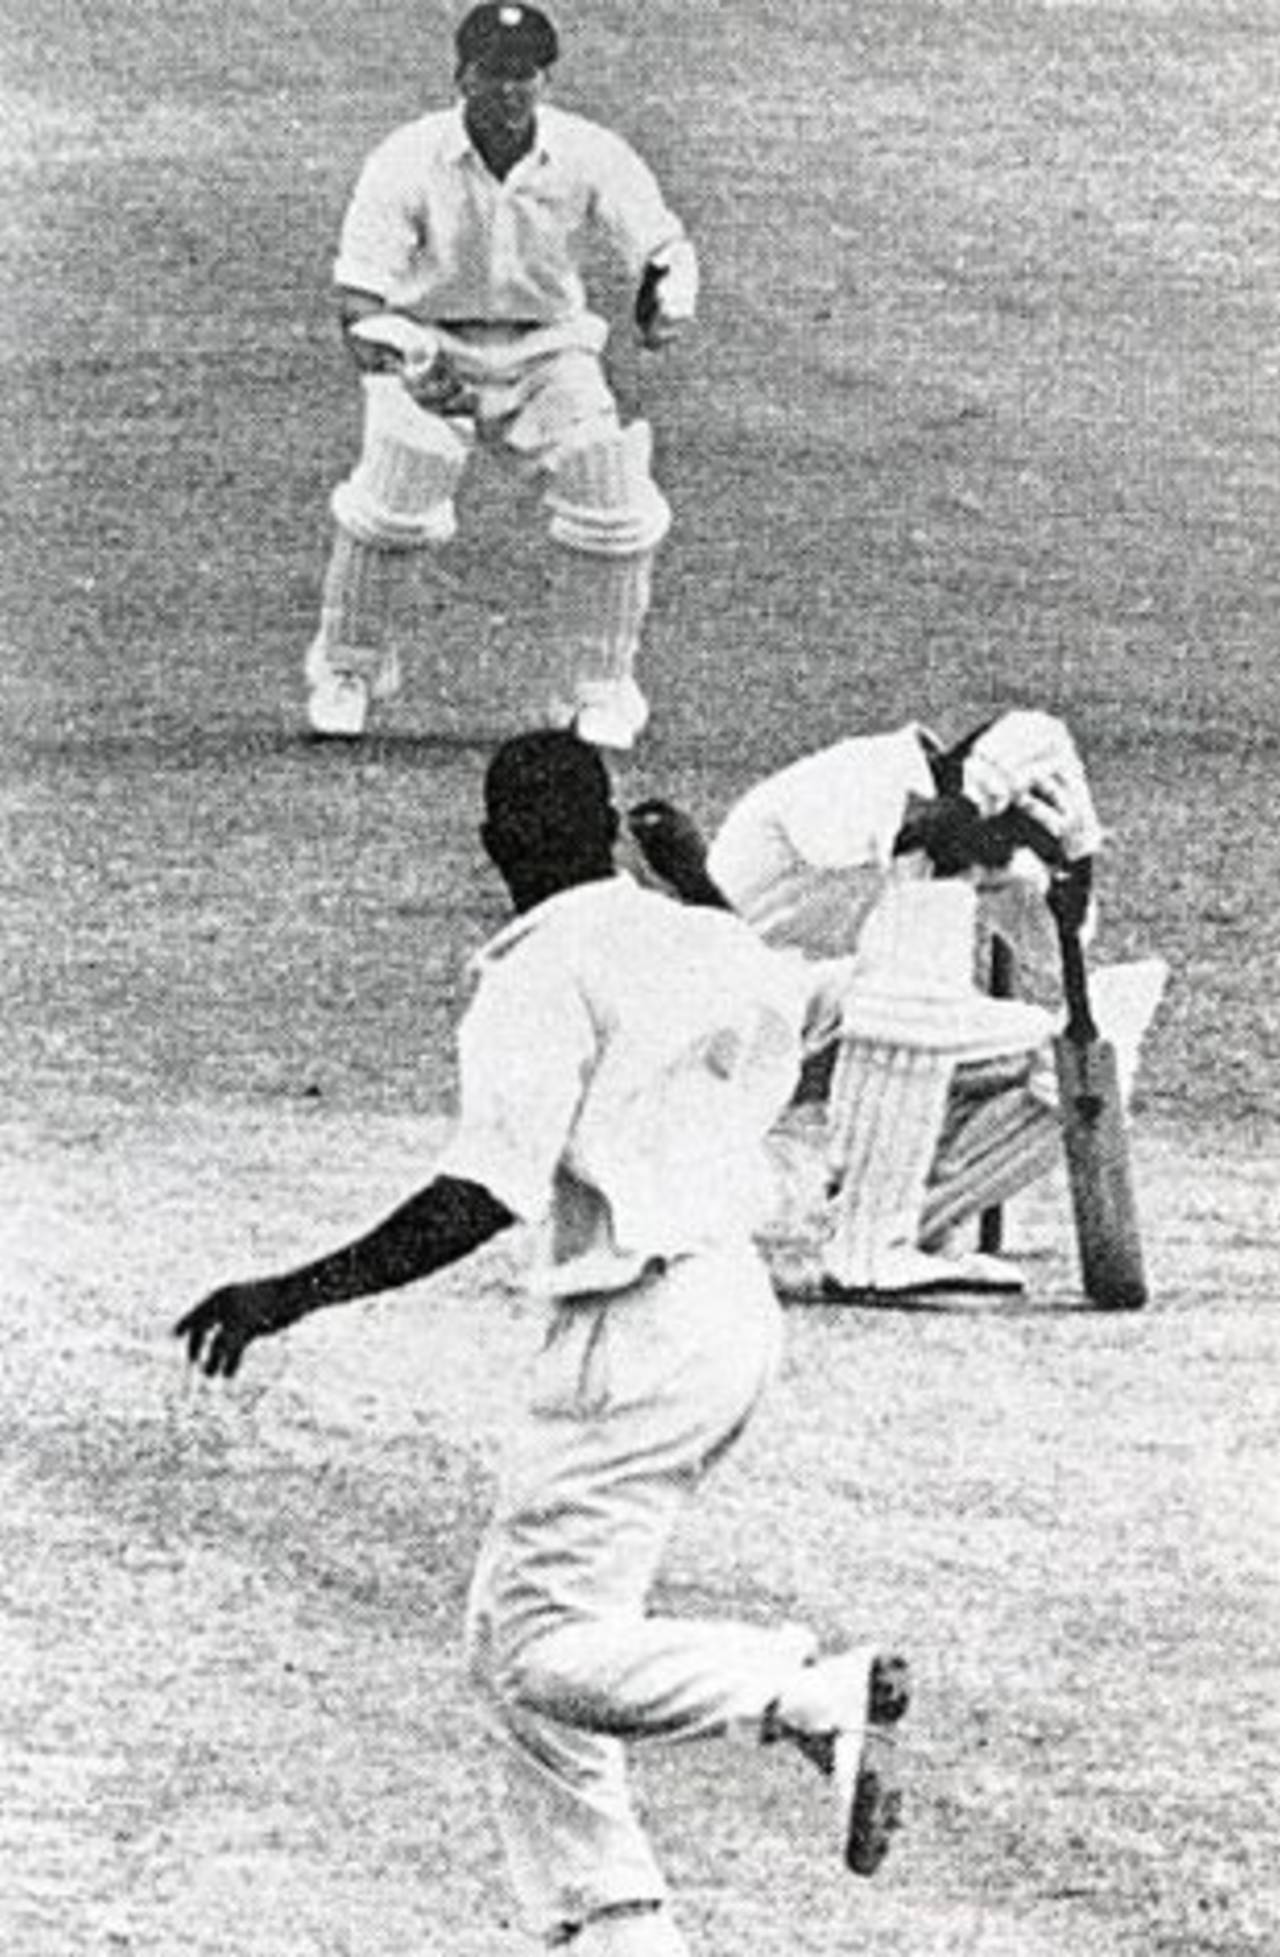 Nari Contractor clutches his head after being struck by Charlie Griffith, Barbados v Indians, March 17, 1962